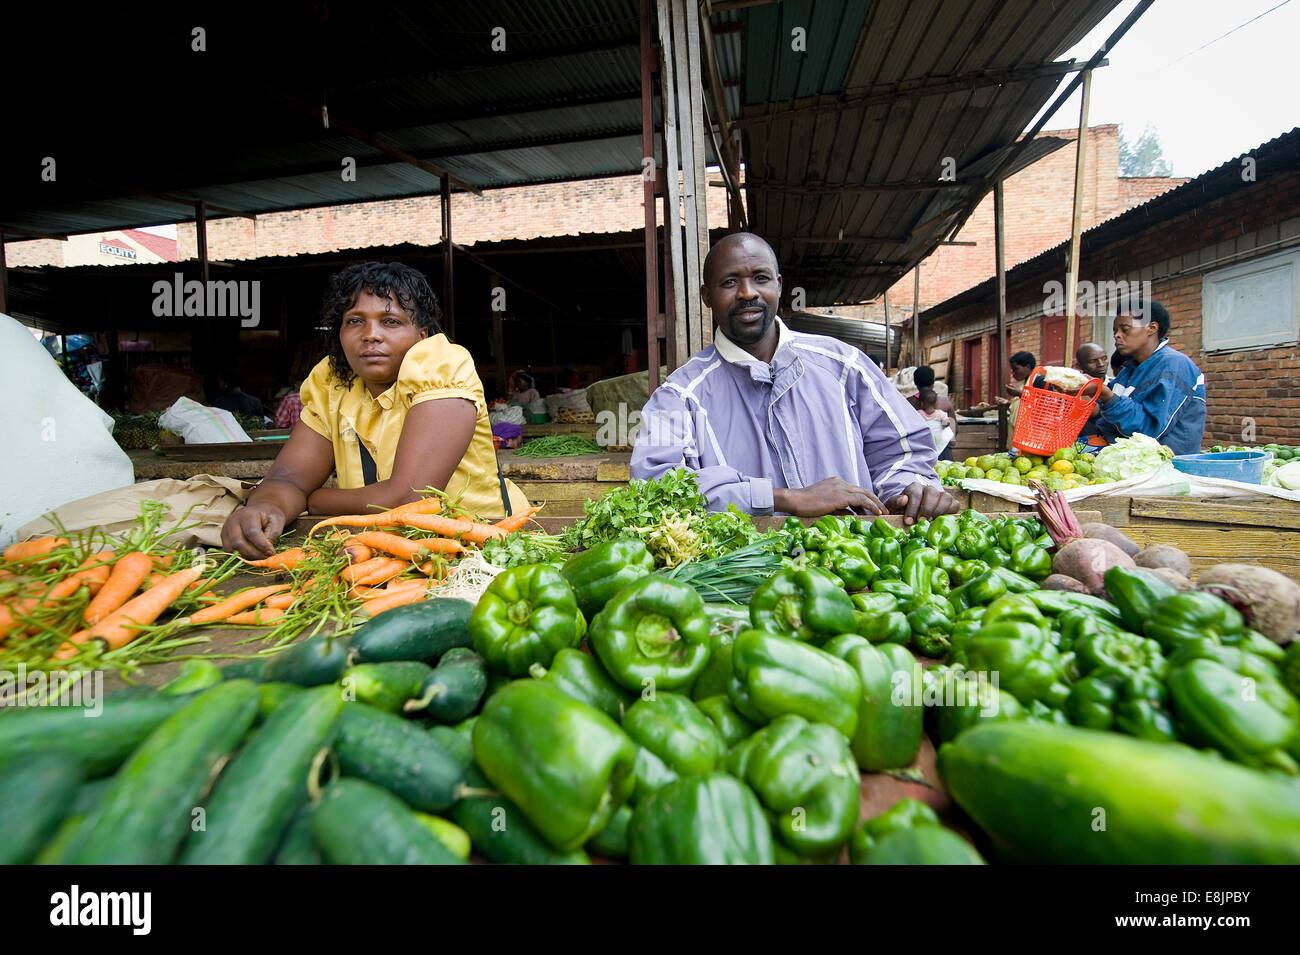 RWANDA, KIGALI: A big market in the capital offers everything: food, clothes, kitchen equipment, herbal medicine. Stock Photo